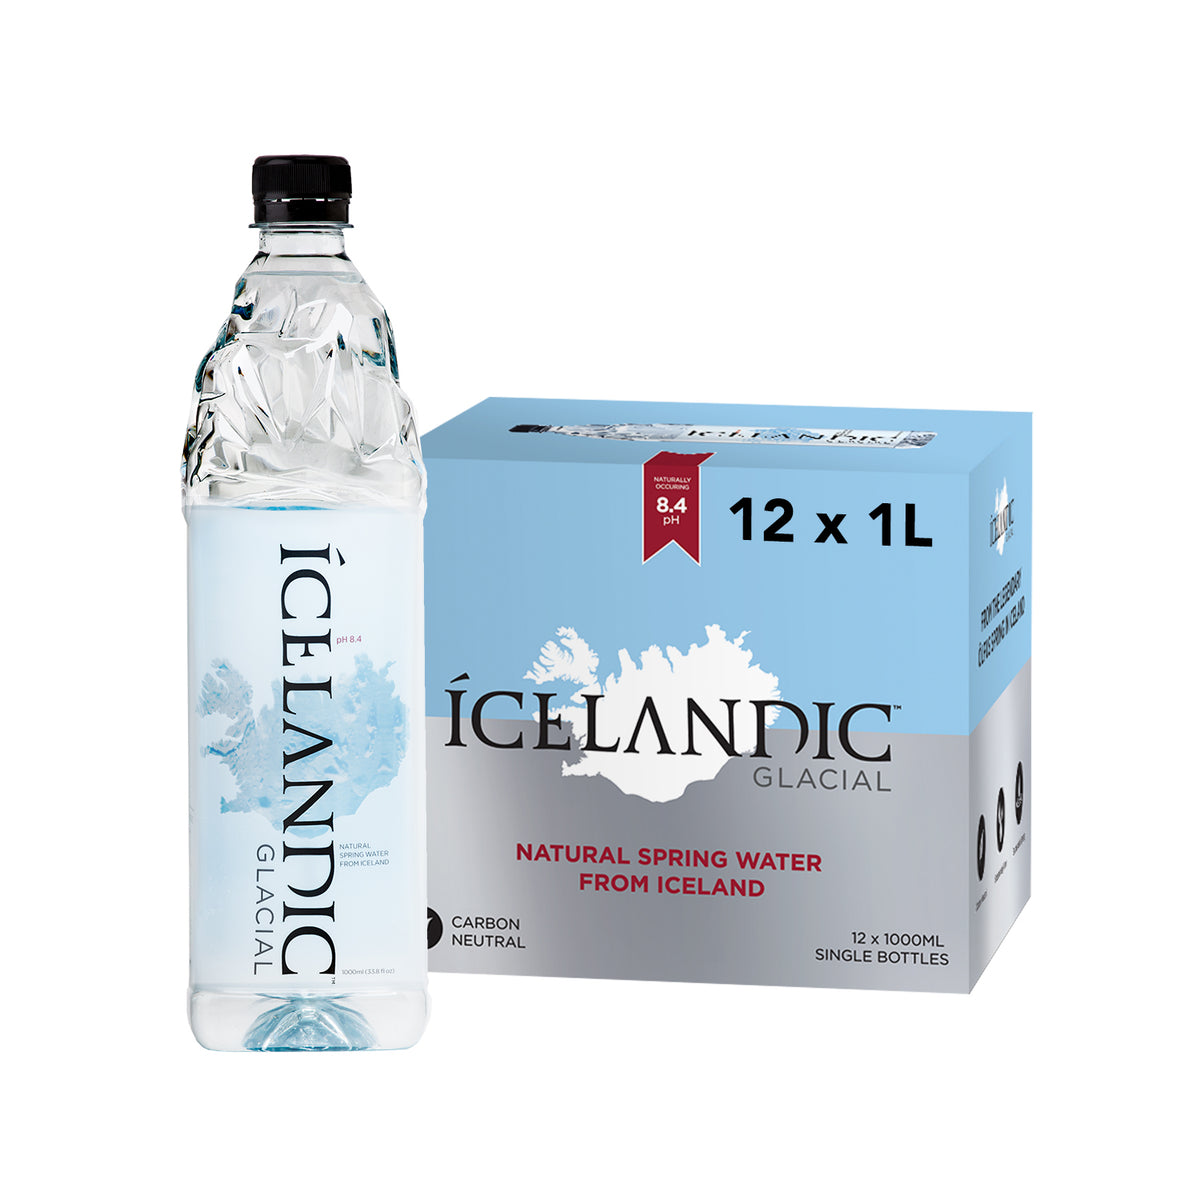 Our Products - Icelandic Glacial